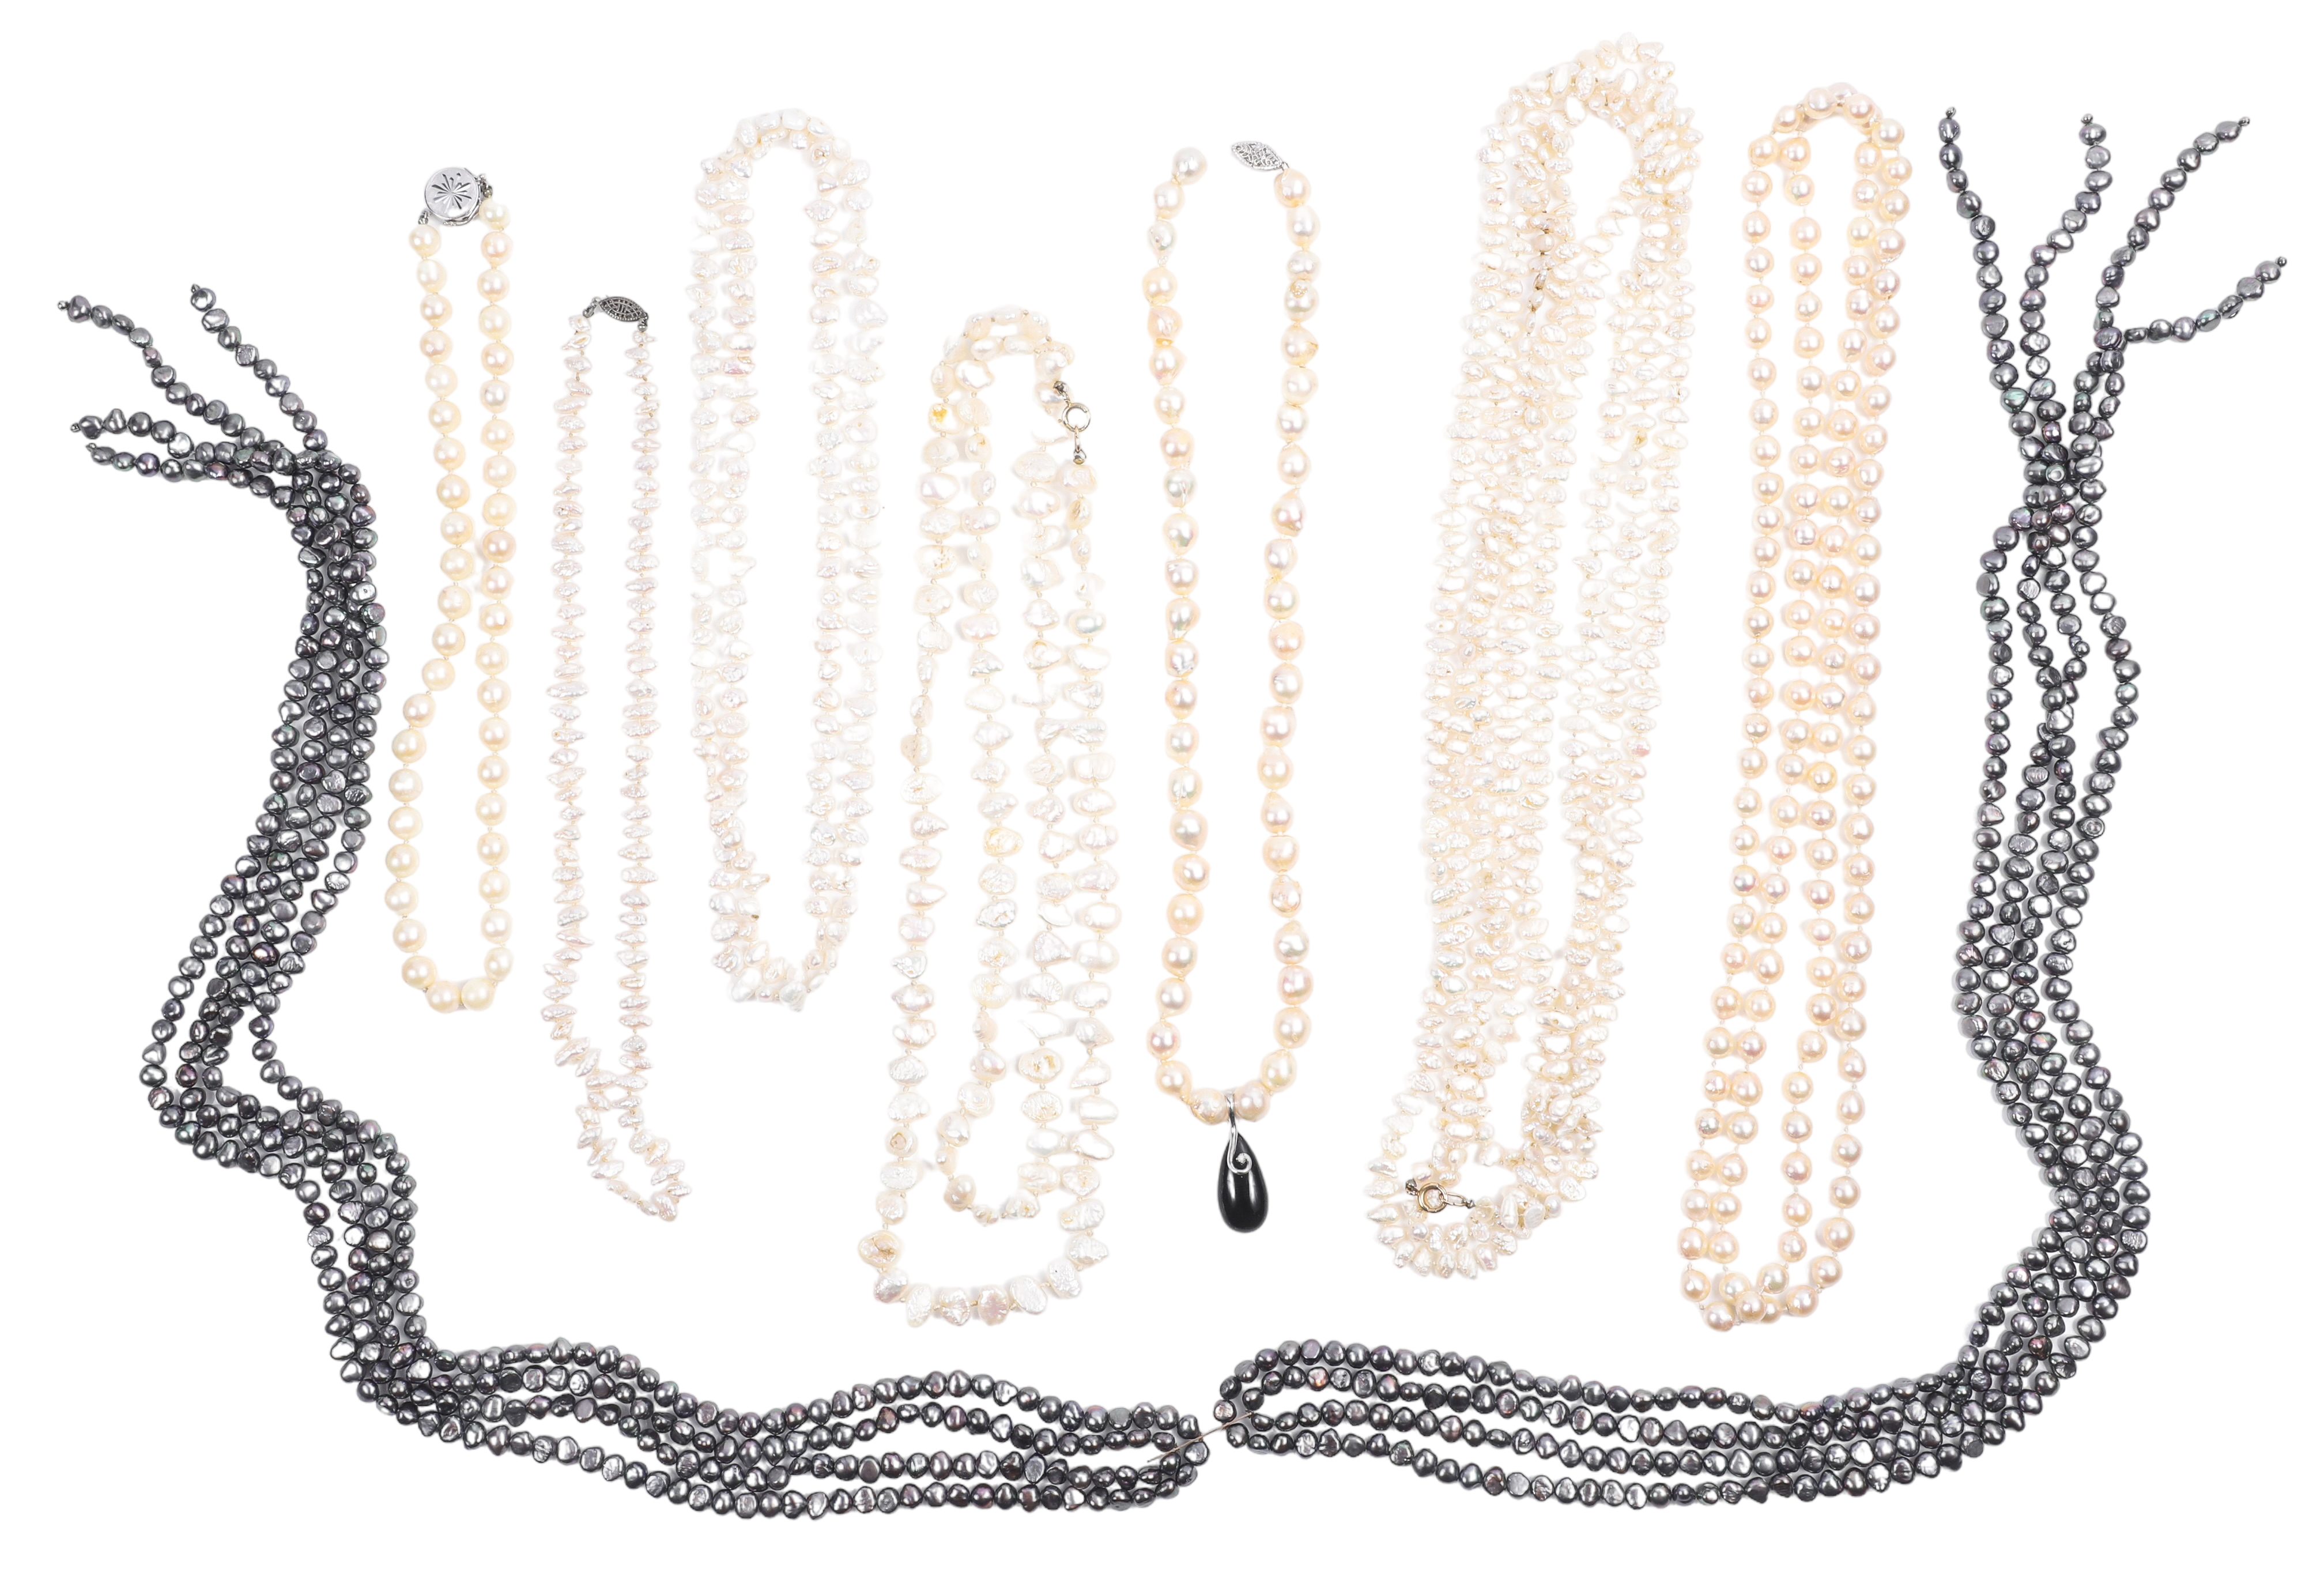 Pearl necklace grouping to include 2e159b